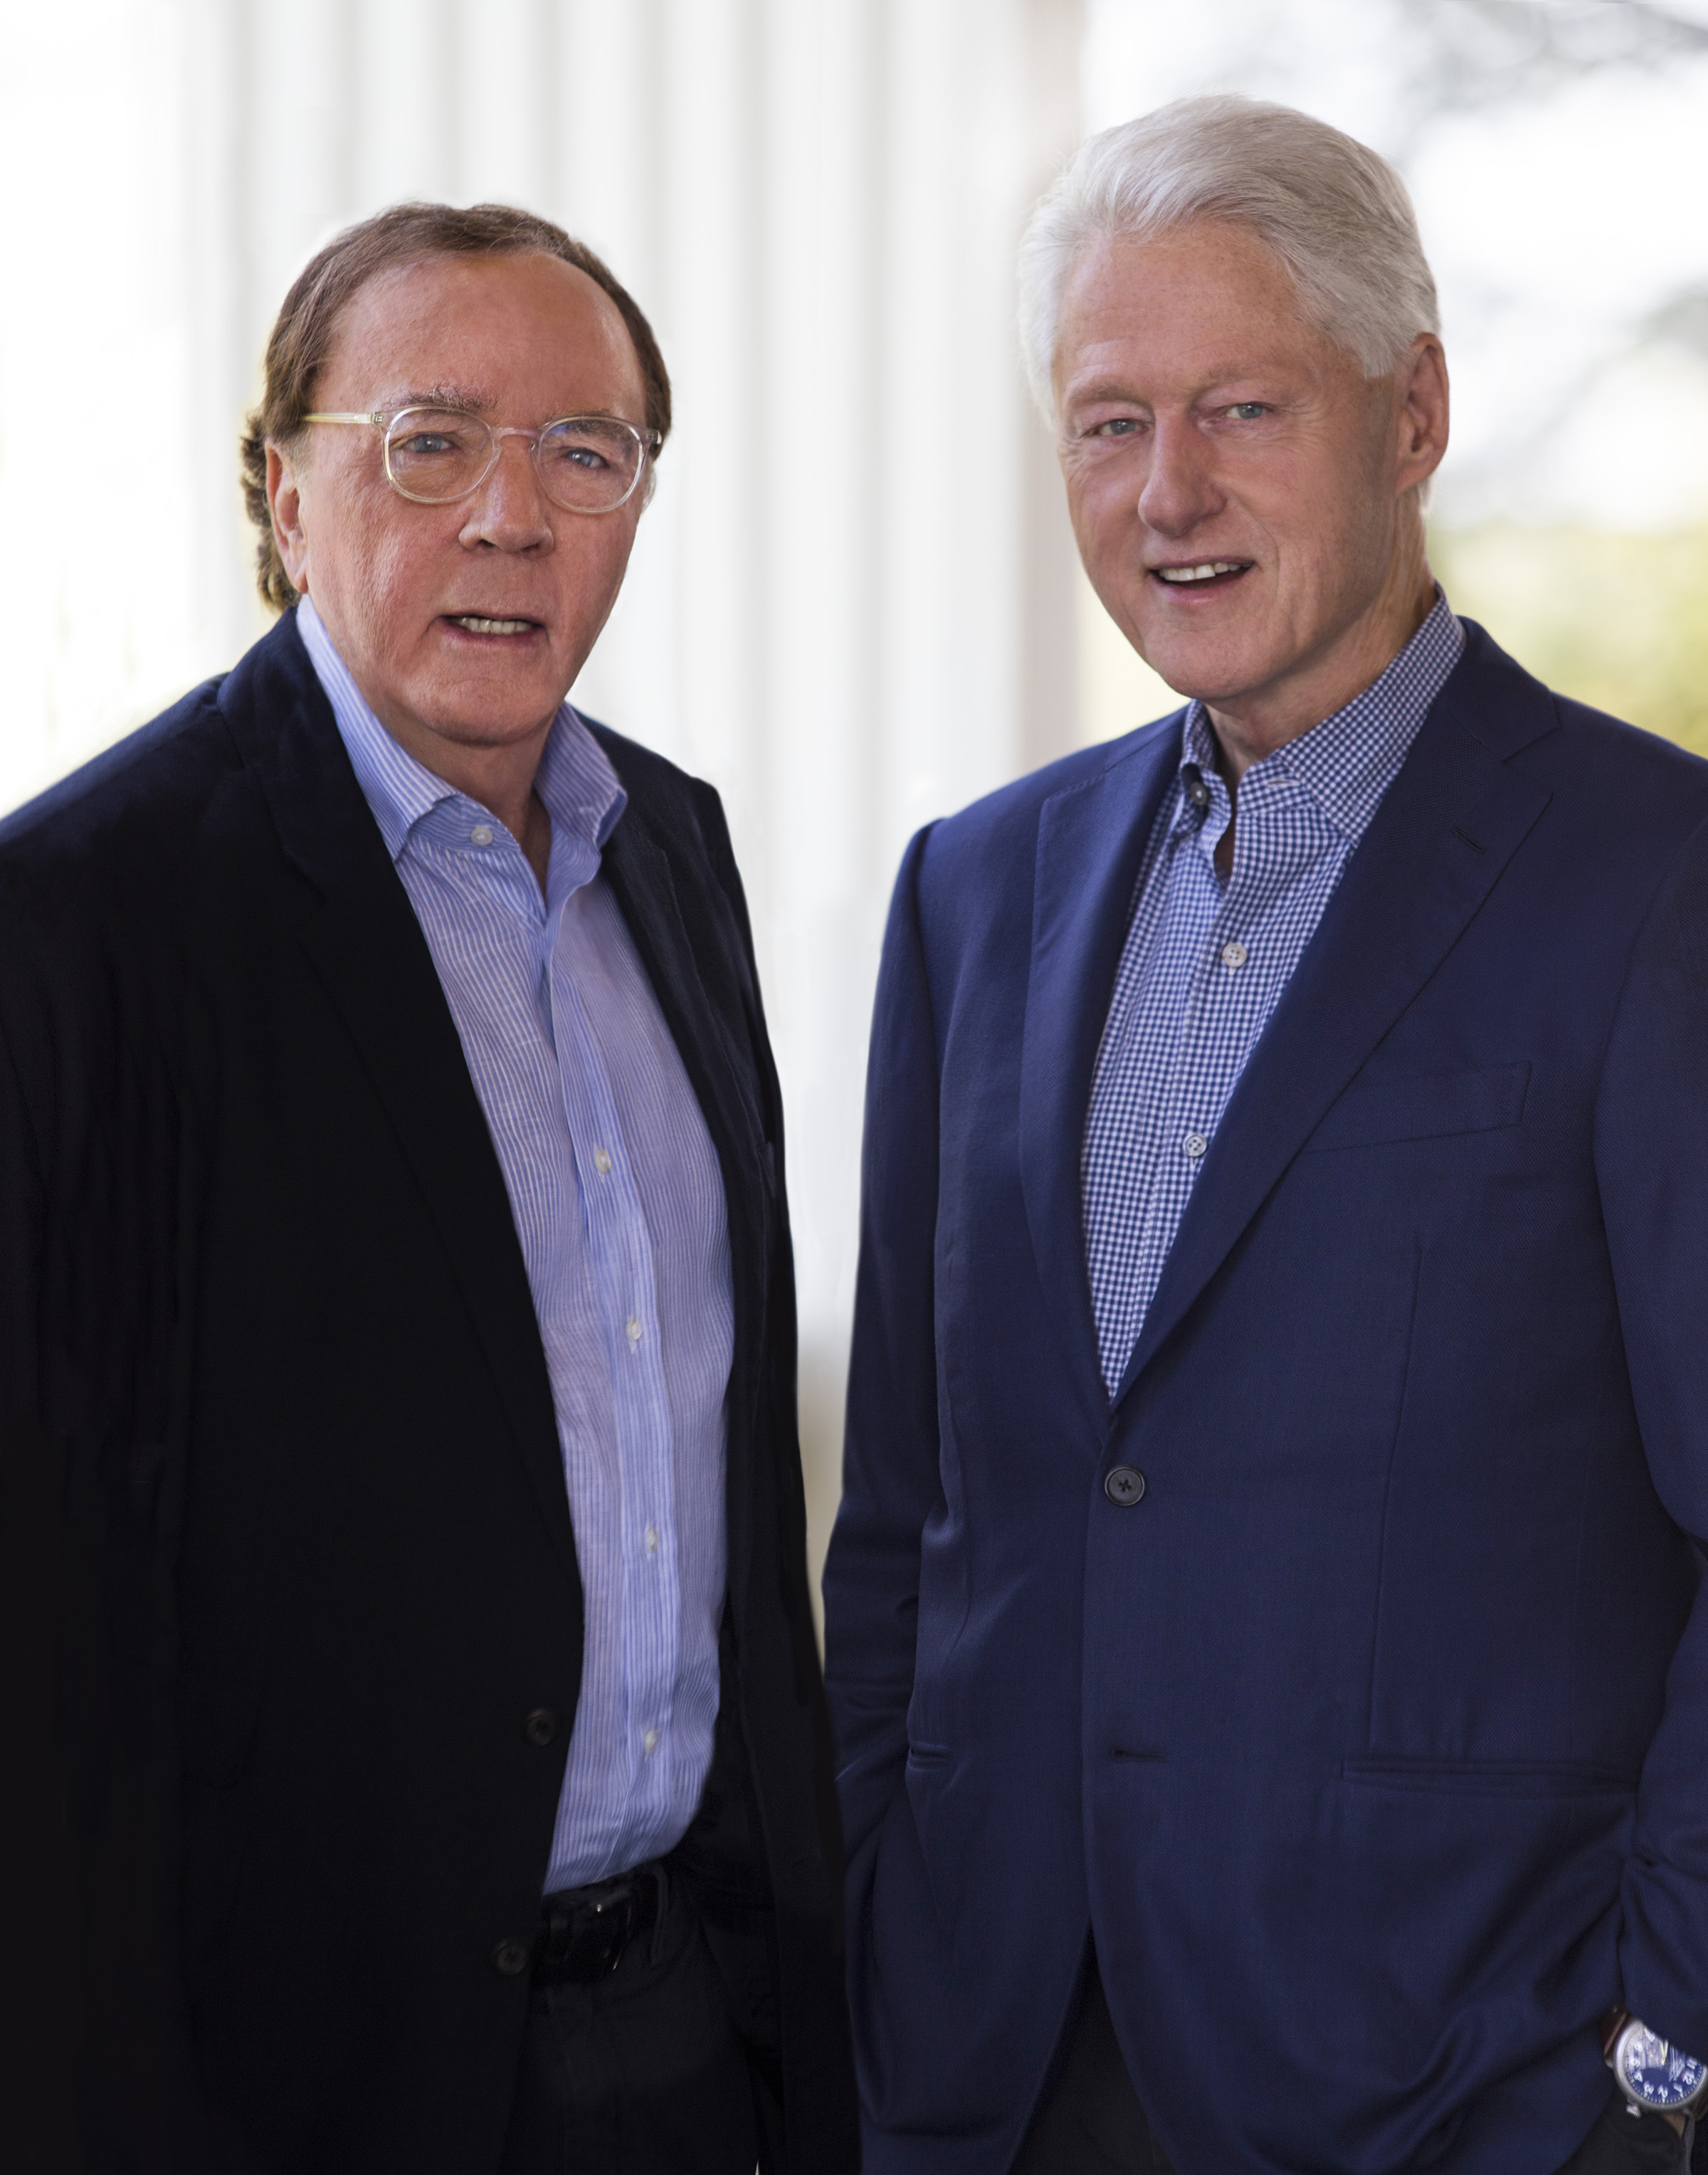 Bill Clinton and James Patterson, collaborators on "The President is Missing." (David Burnett)